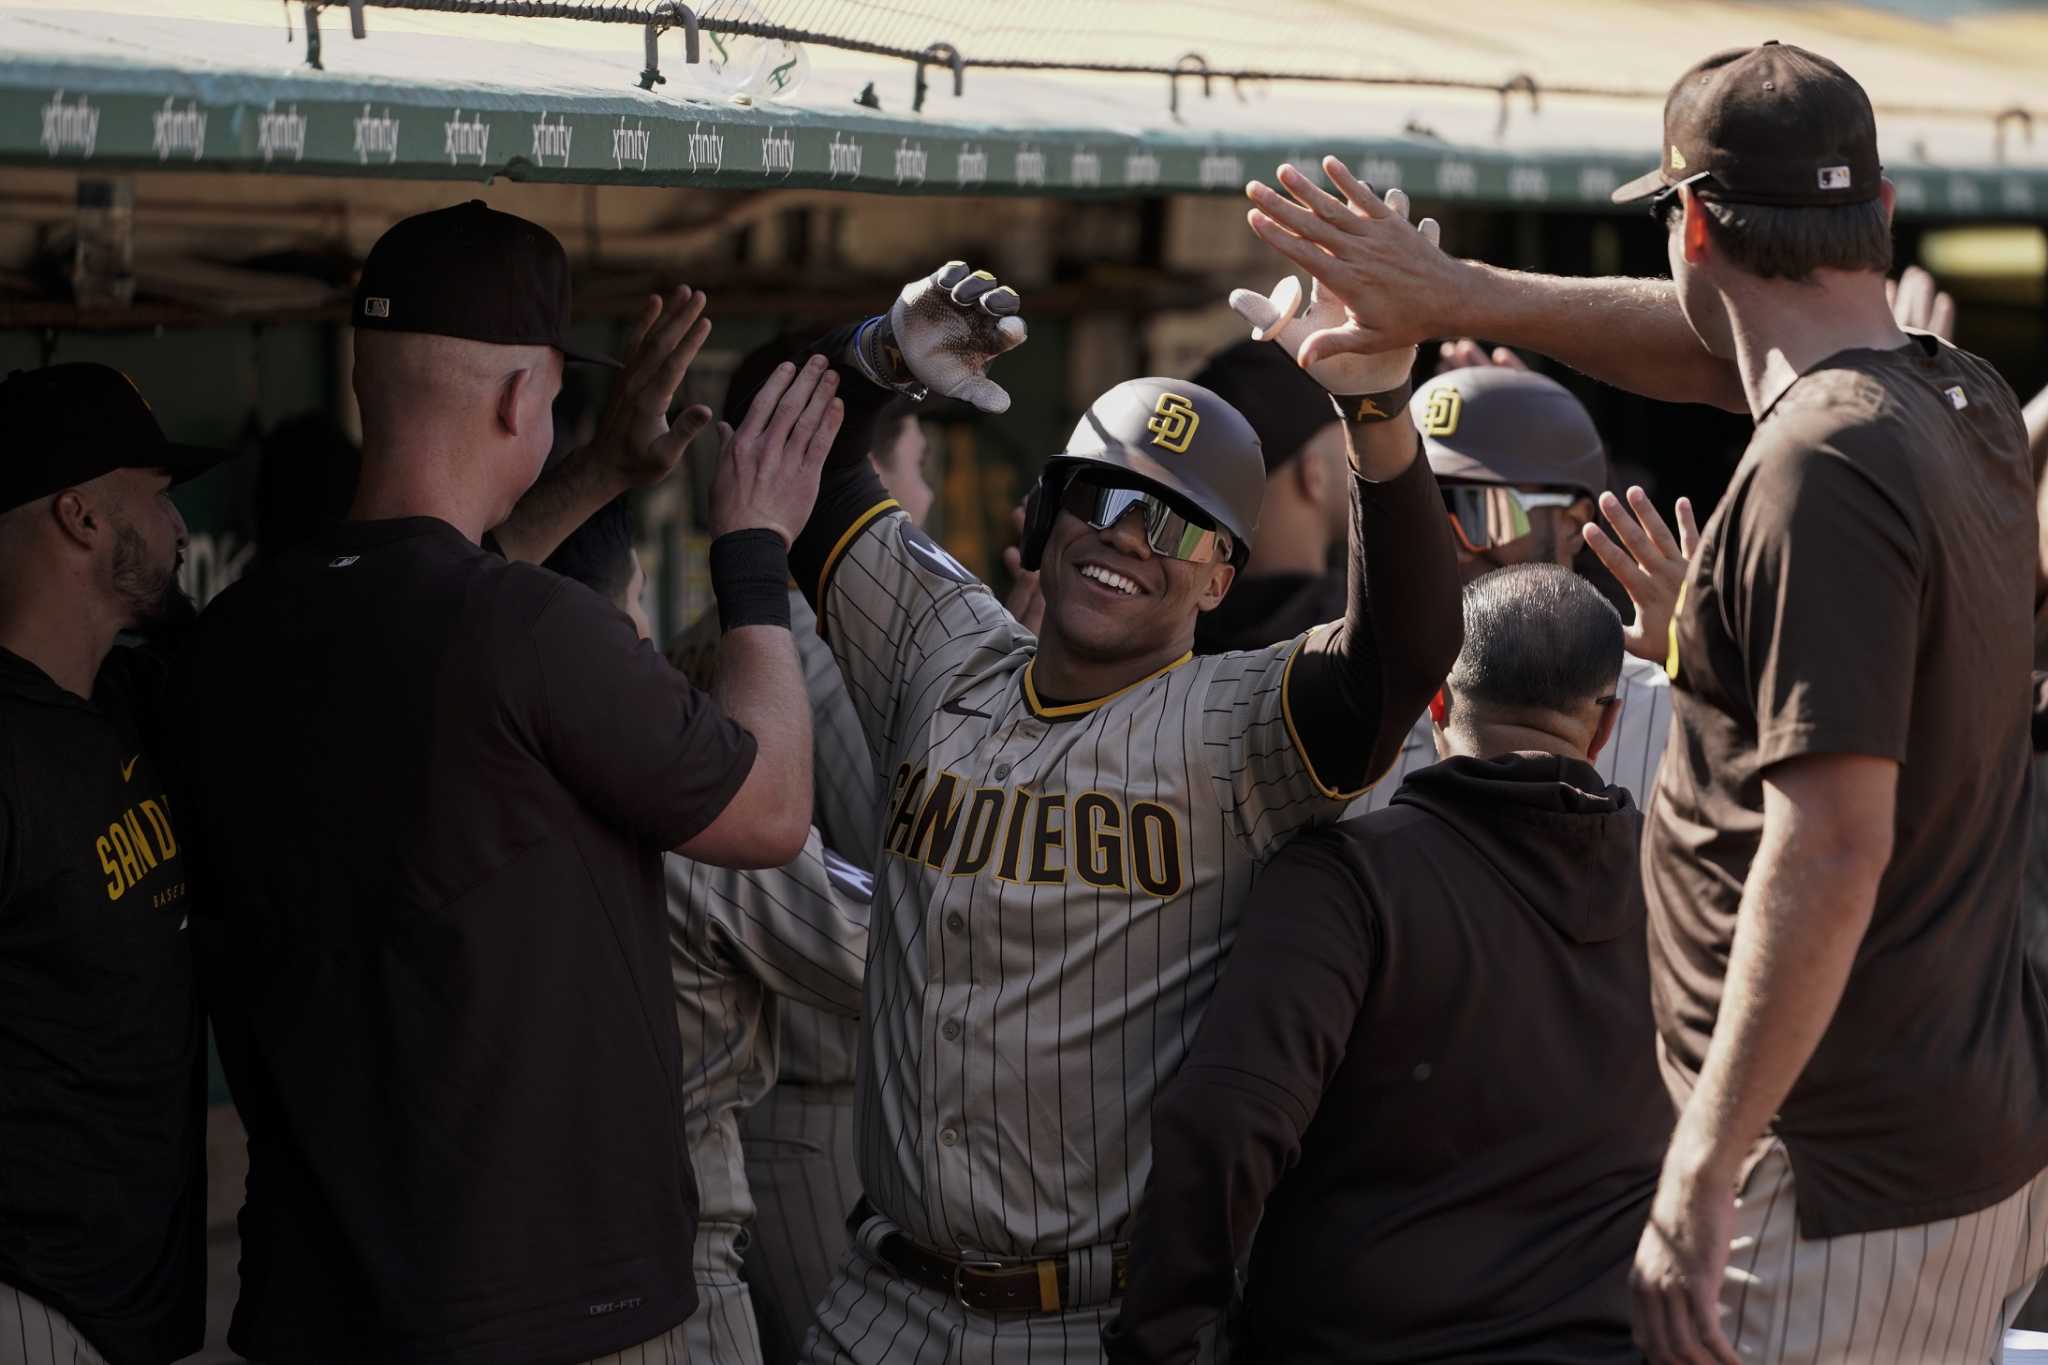 A's crushed 10-1 as Padres complete sweep behind Juan Soto's two HRs